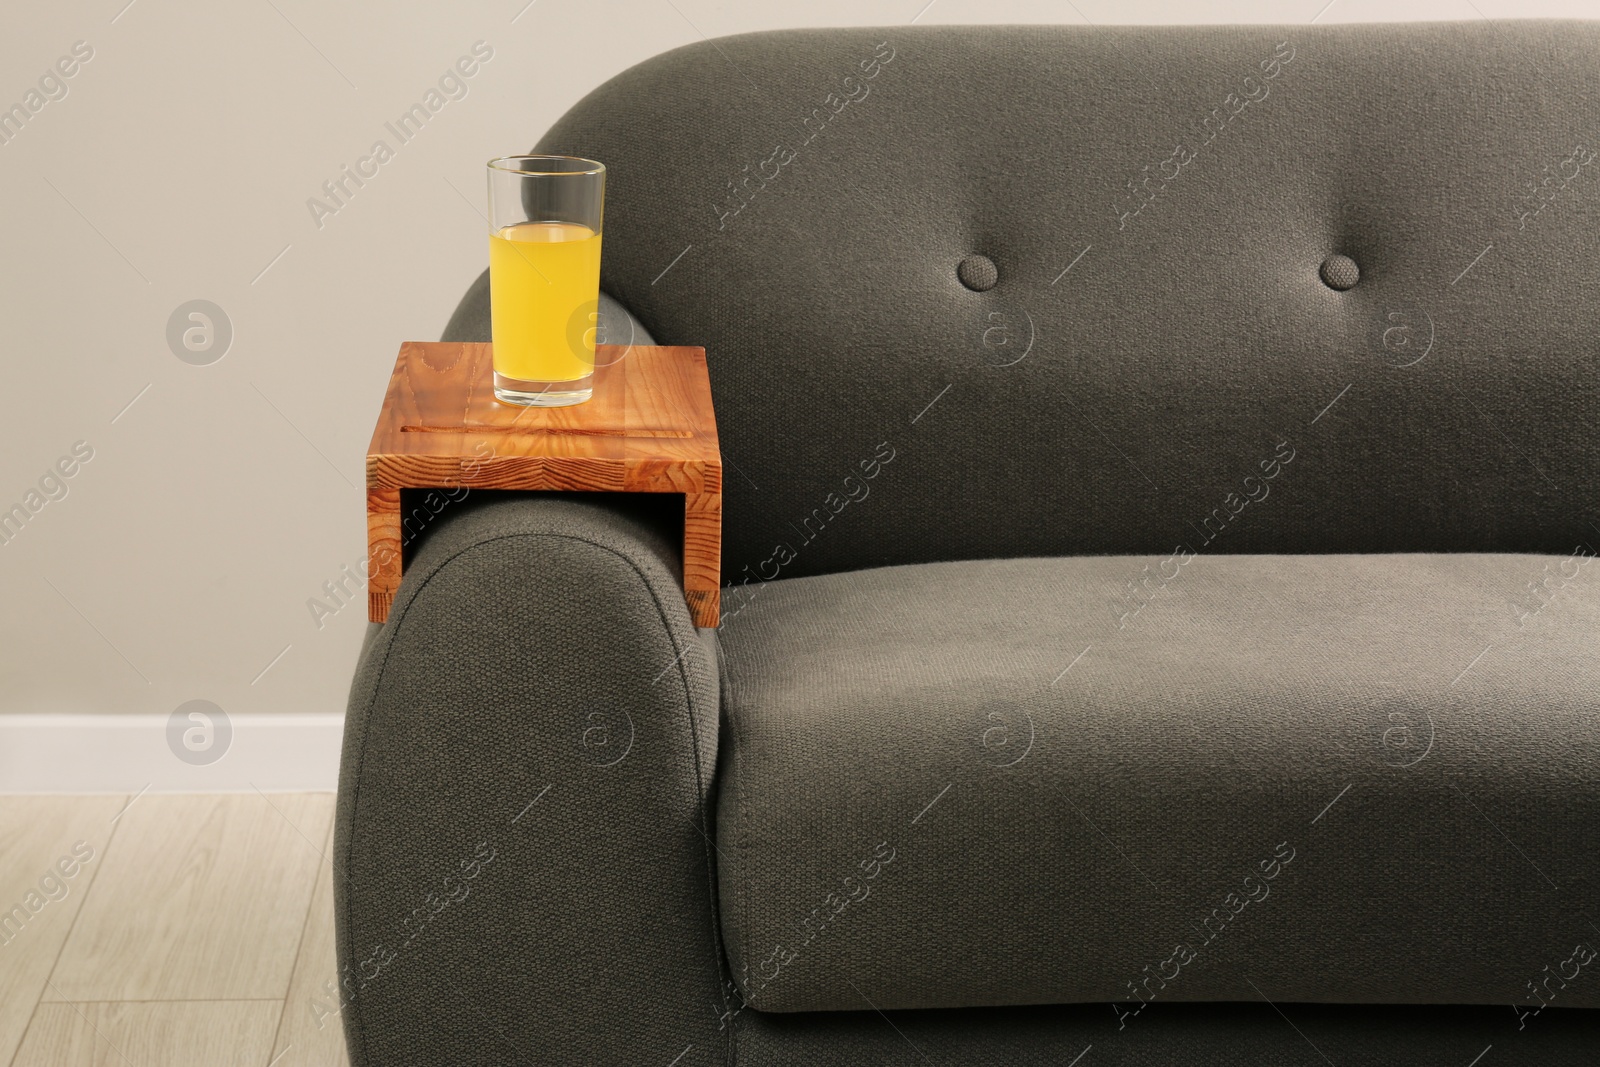 Photo of Glass of juice on sofa with wooden armrest table in room. Interior element